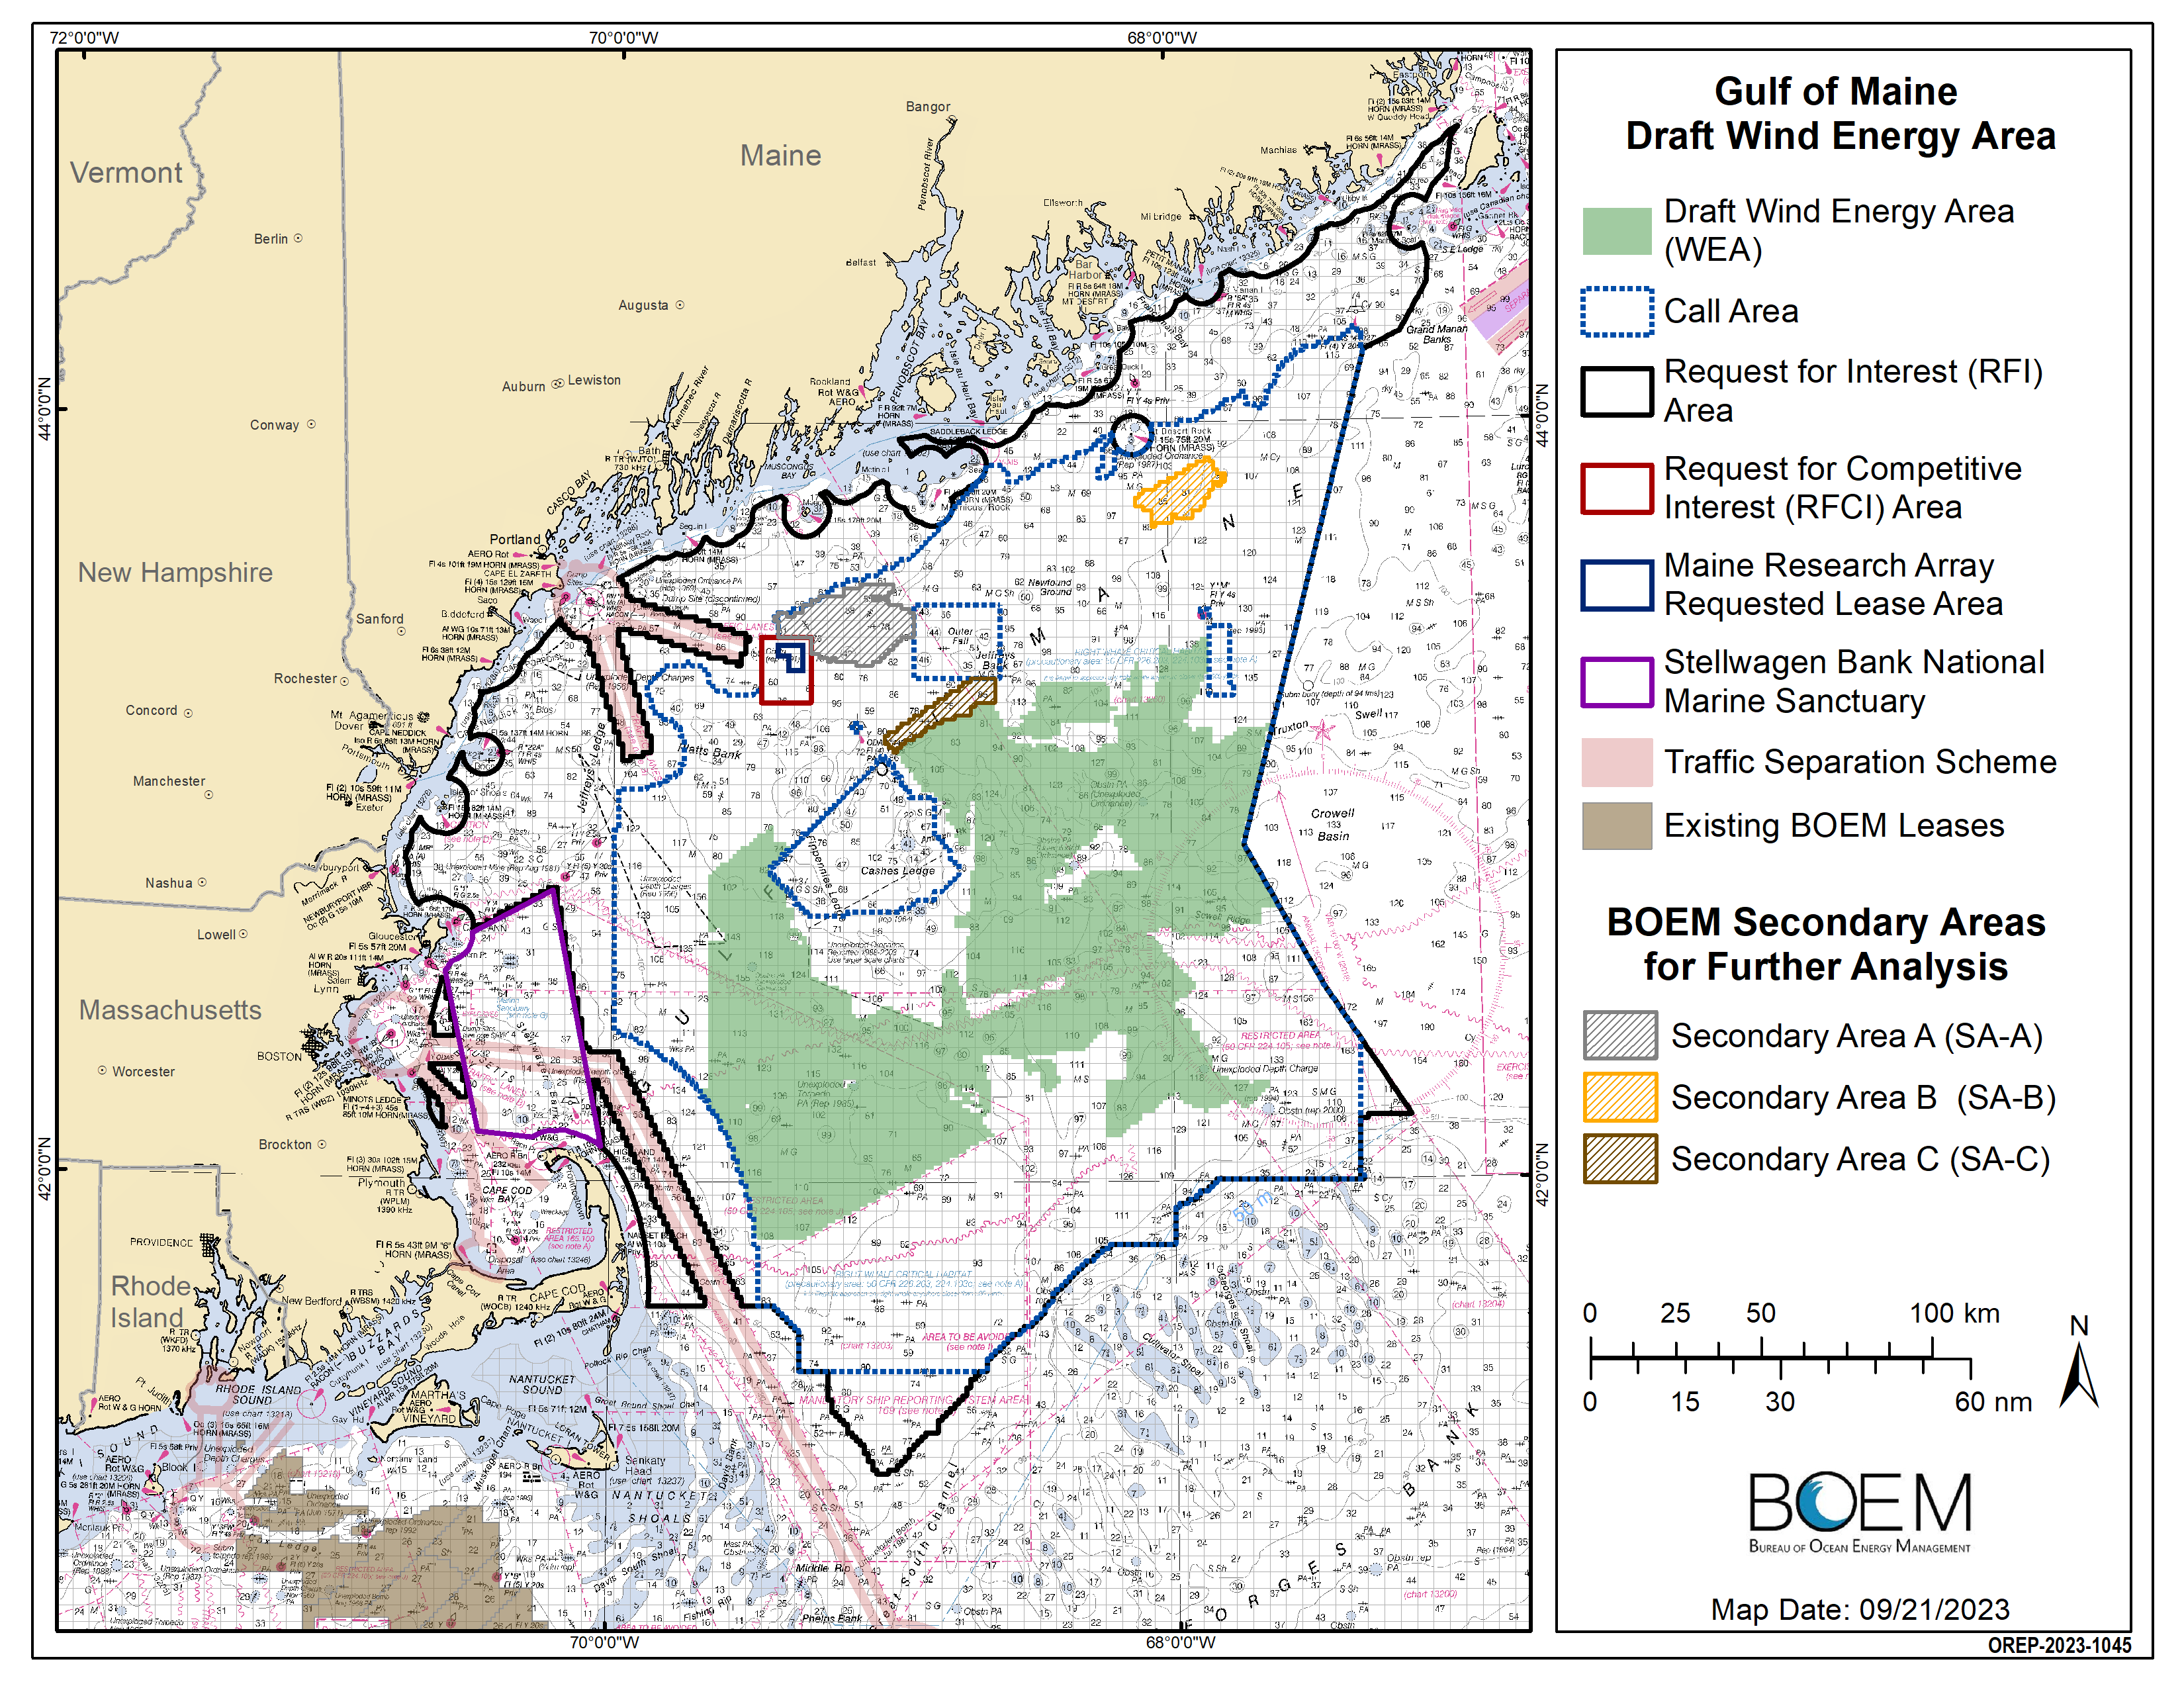 https://www.boem.gov/sites/default/files/images/GulfofMaine_draft_WEA_outline_SA_areas_nauticalchart.png